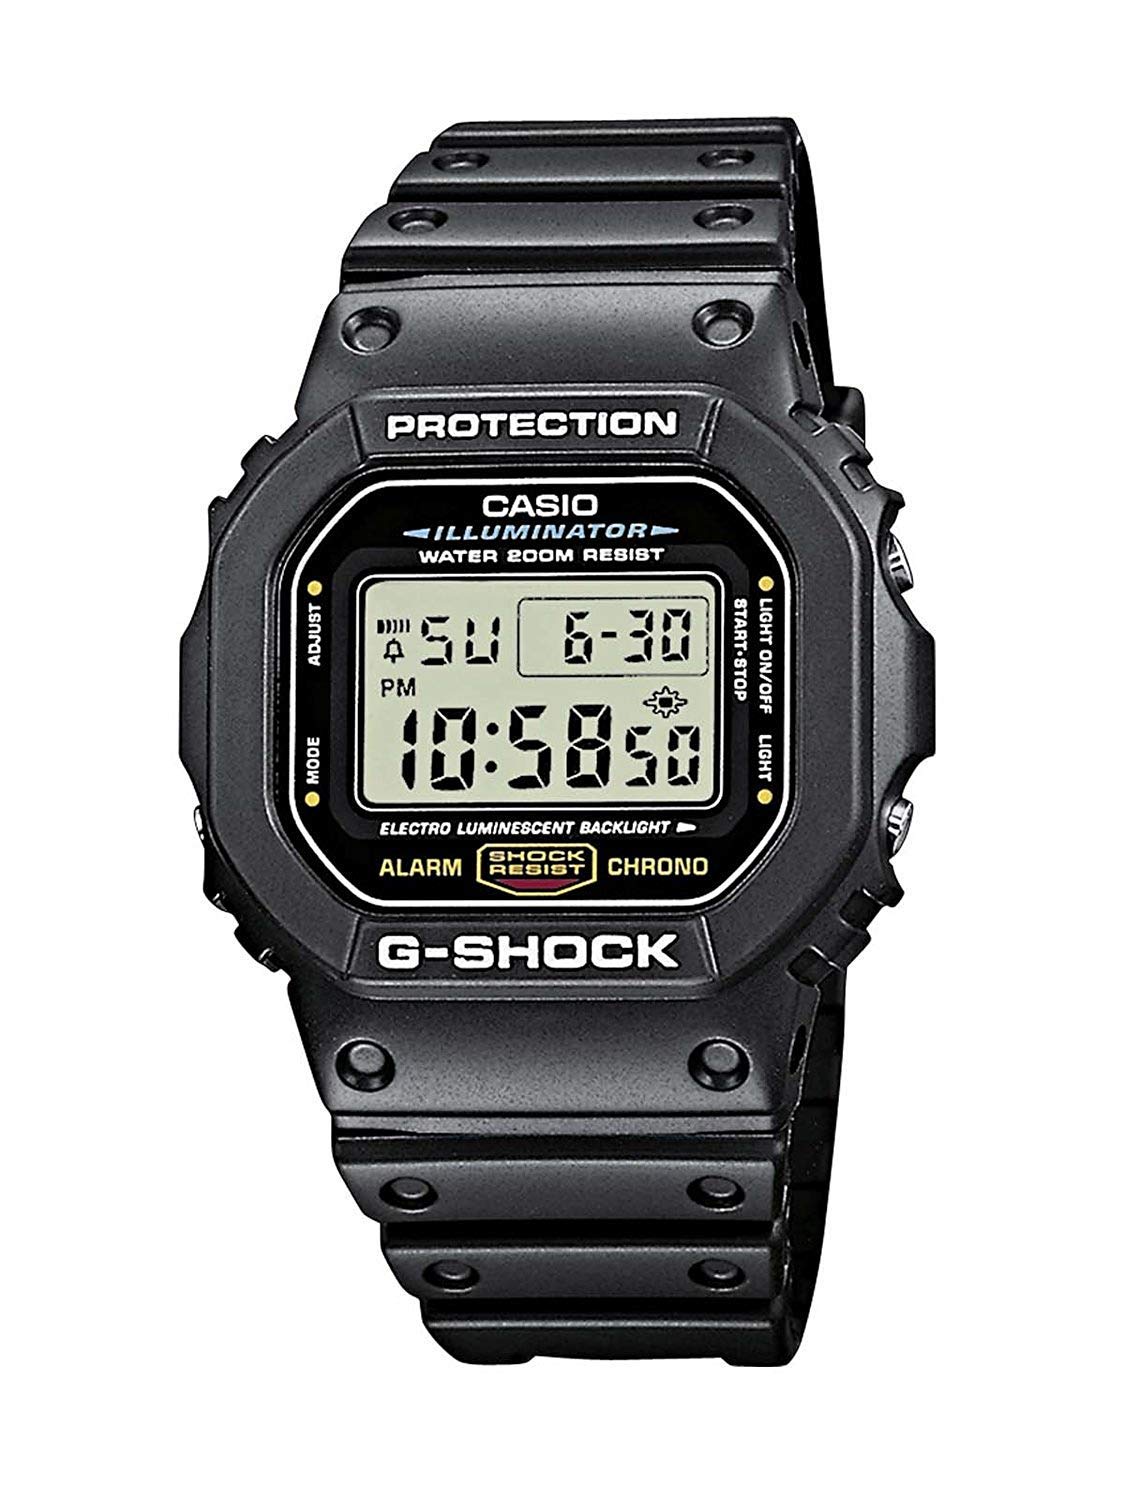 Casio Mens G-Shock Digital Watch, with Quartz Digital Movement, and Multi-Function Alarm, Stopwatch, and Countdown Timer, Hourly Time Signal, Auto Calendar, Water-Resistant to 200 M (660 Feet)